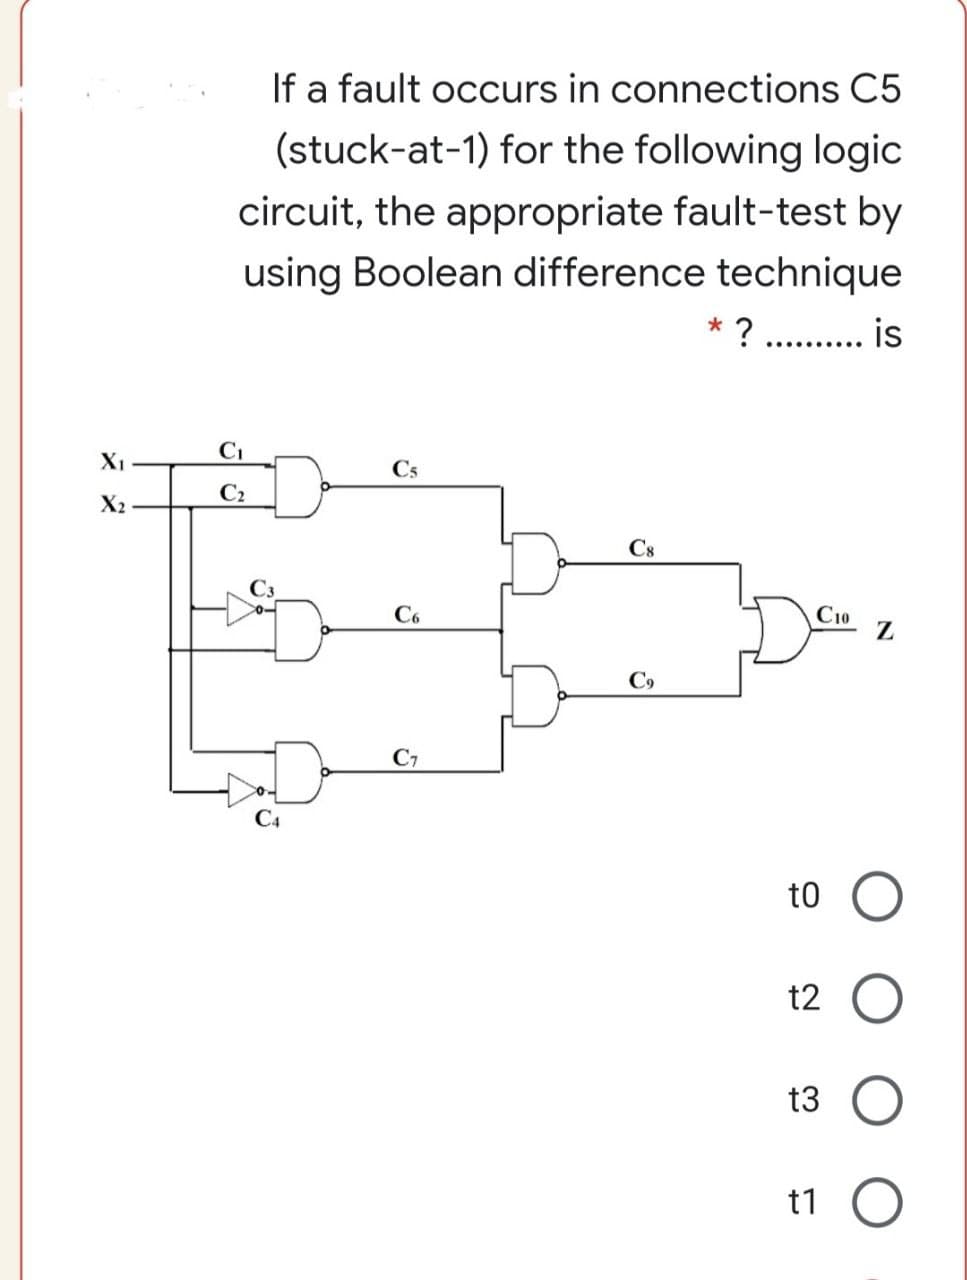 If a fault occurs in connections C5
(stuck-at-1) for the following logic
circuit, the appropriate fault-test by
using Boolean difference technique
..........
C1
X1
Cs
C2
X2
Cs
C6
C10
C9
C7
t0
t2
t3
t1 O
